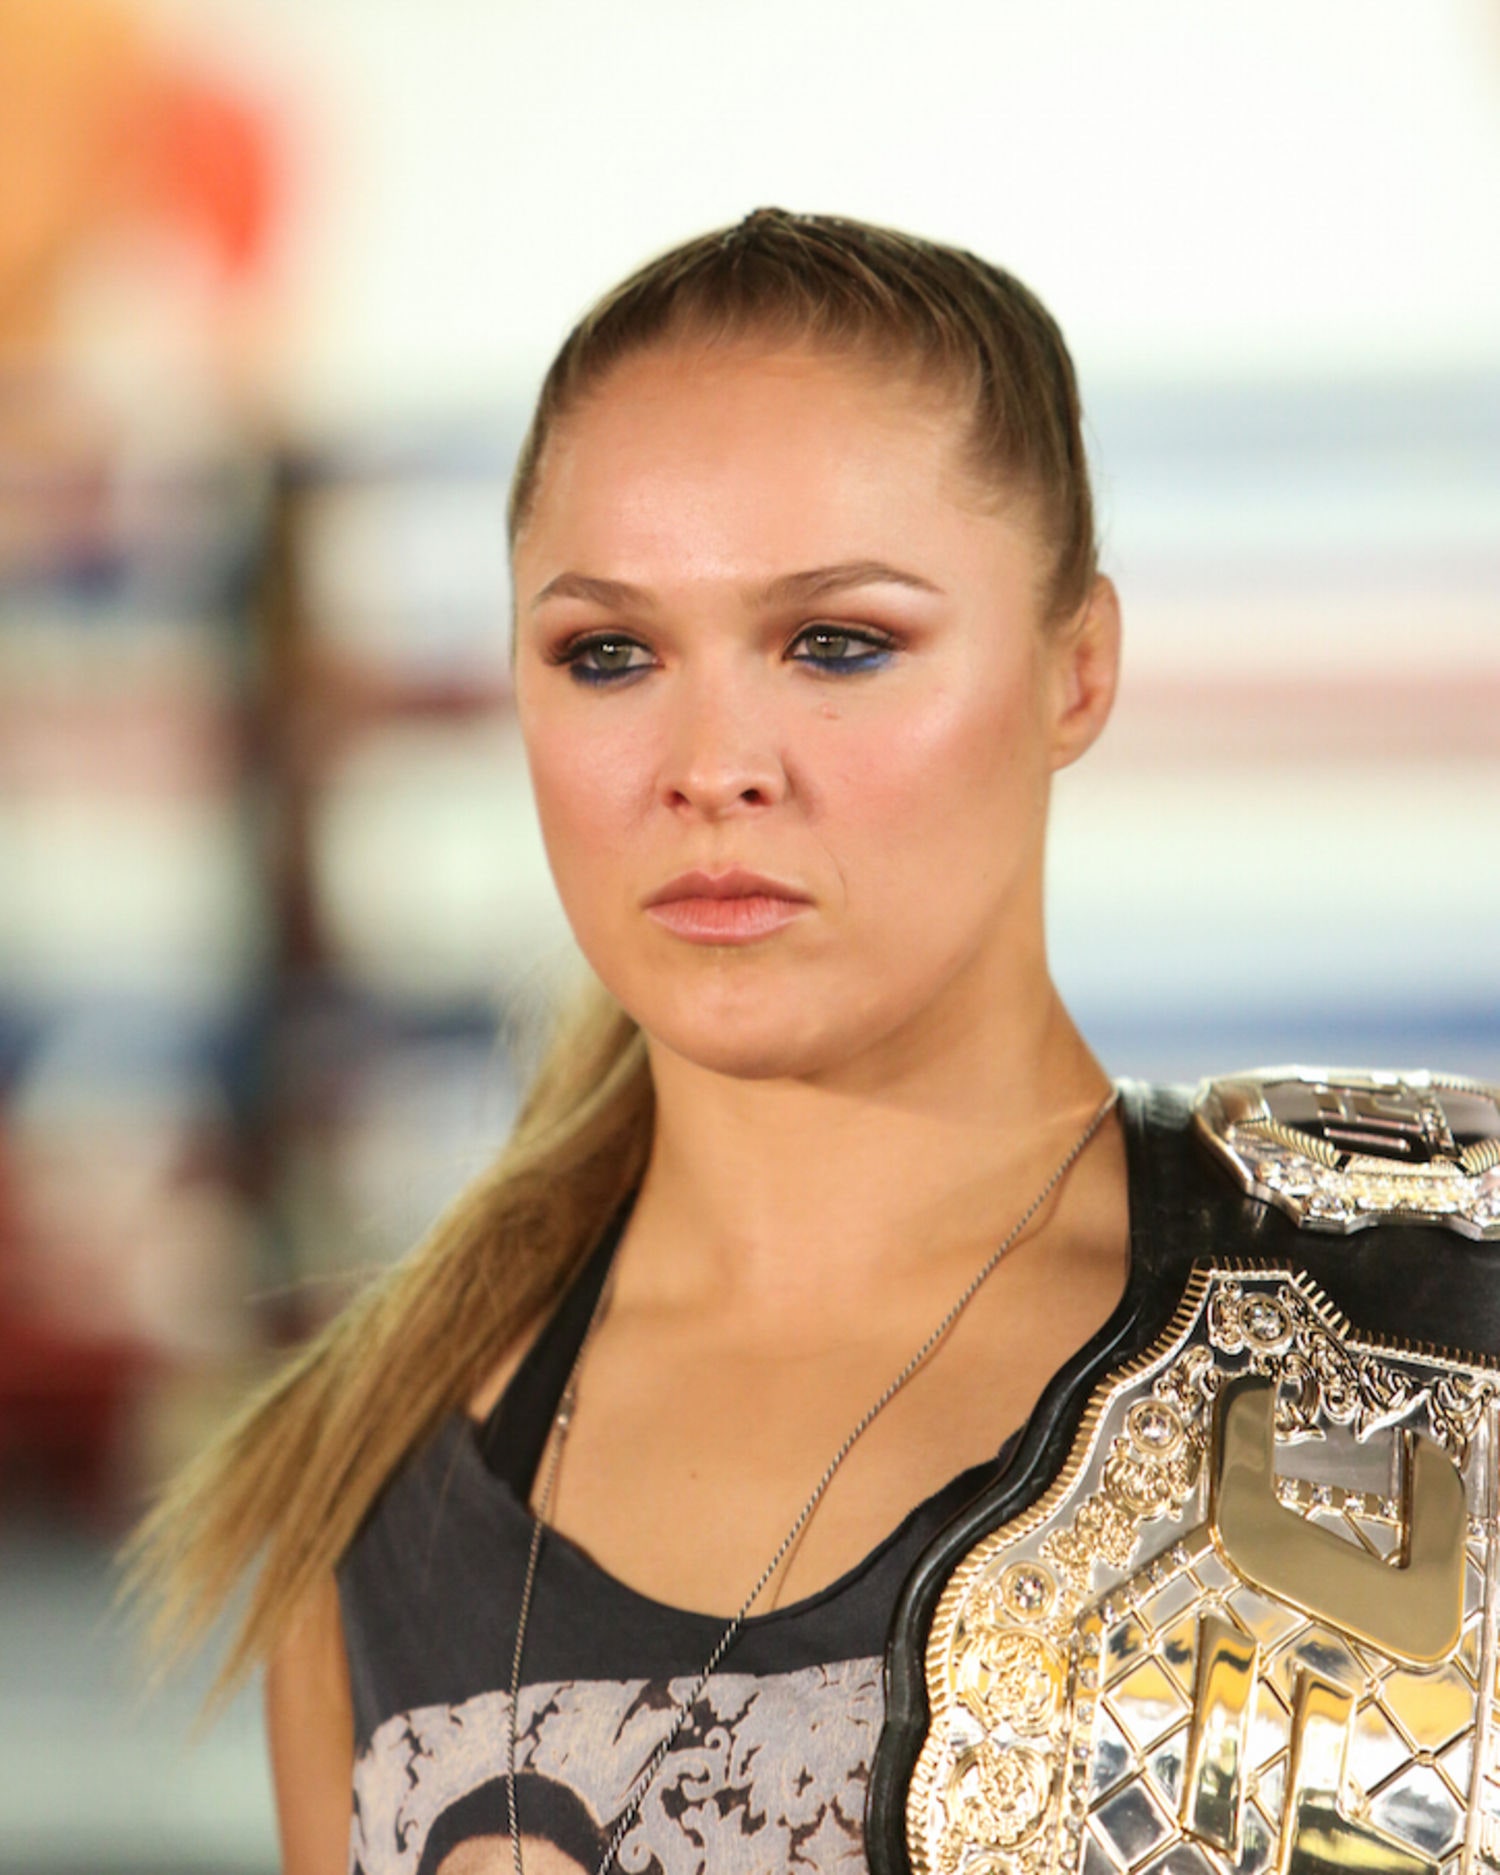 candace dickinson recommends ronda rousey face pics pic